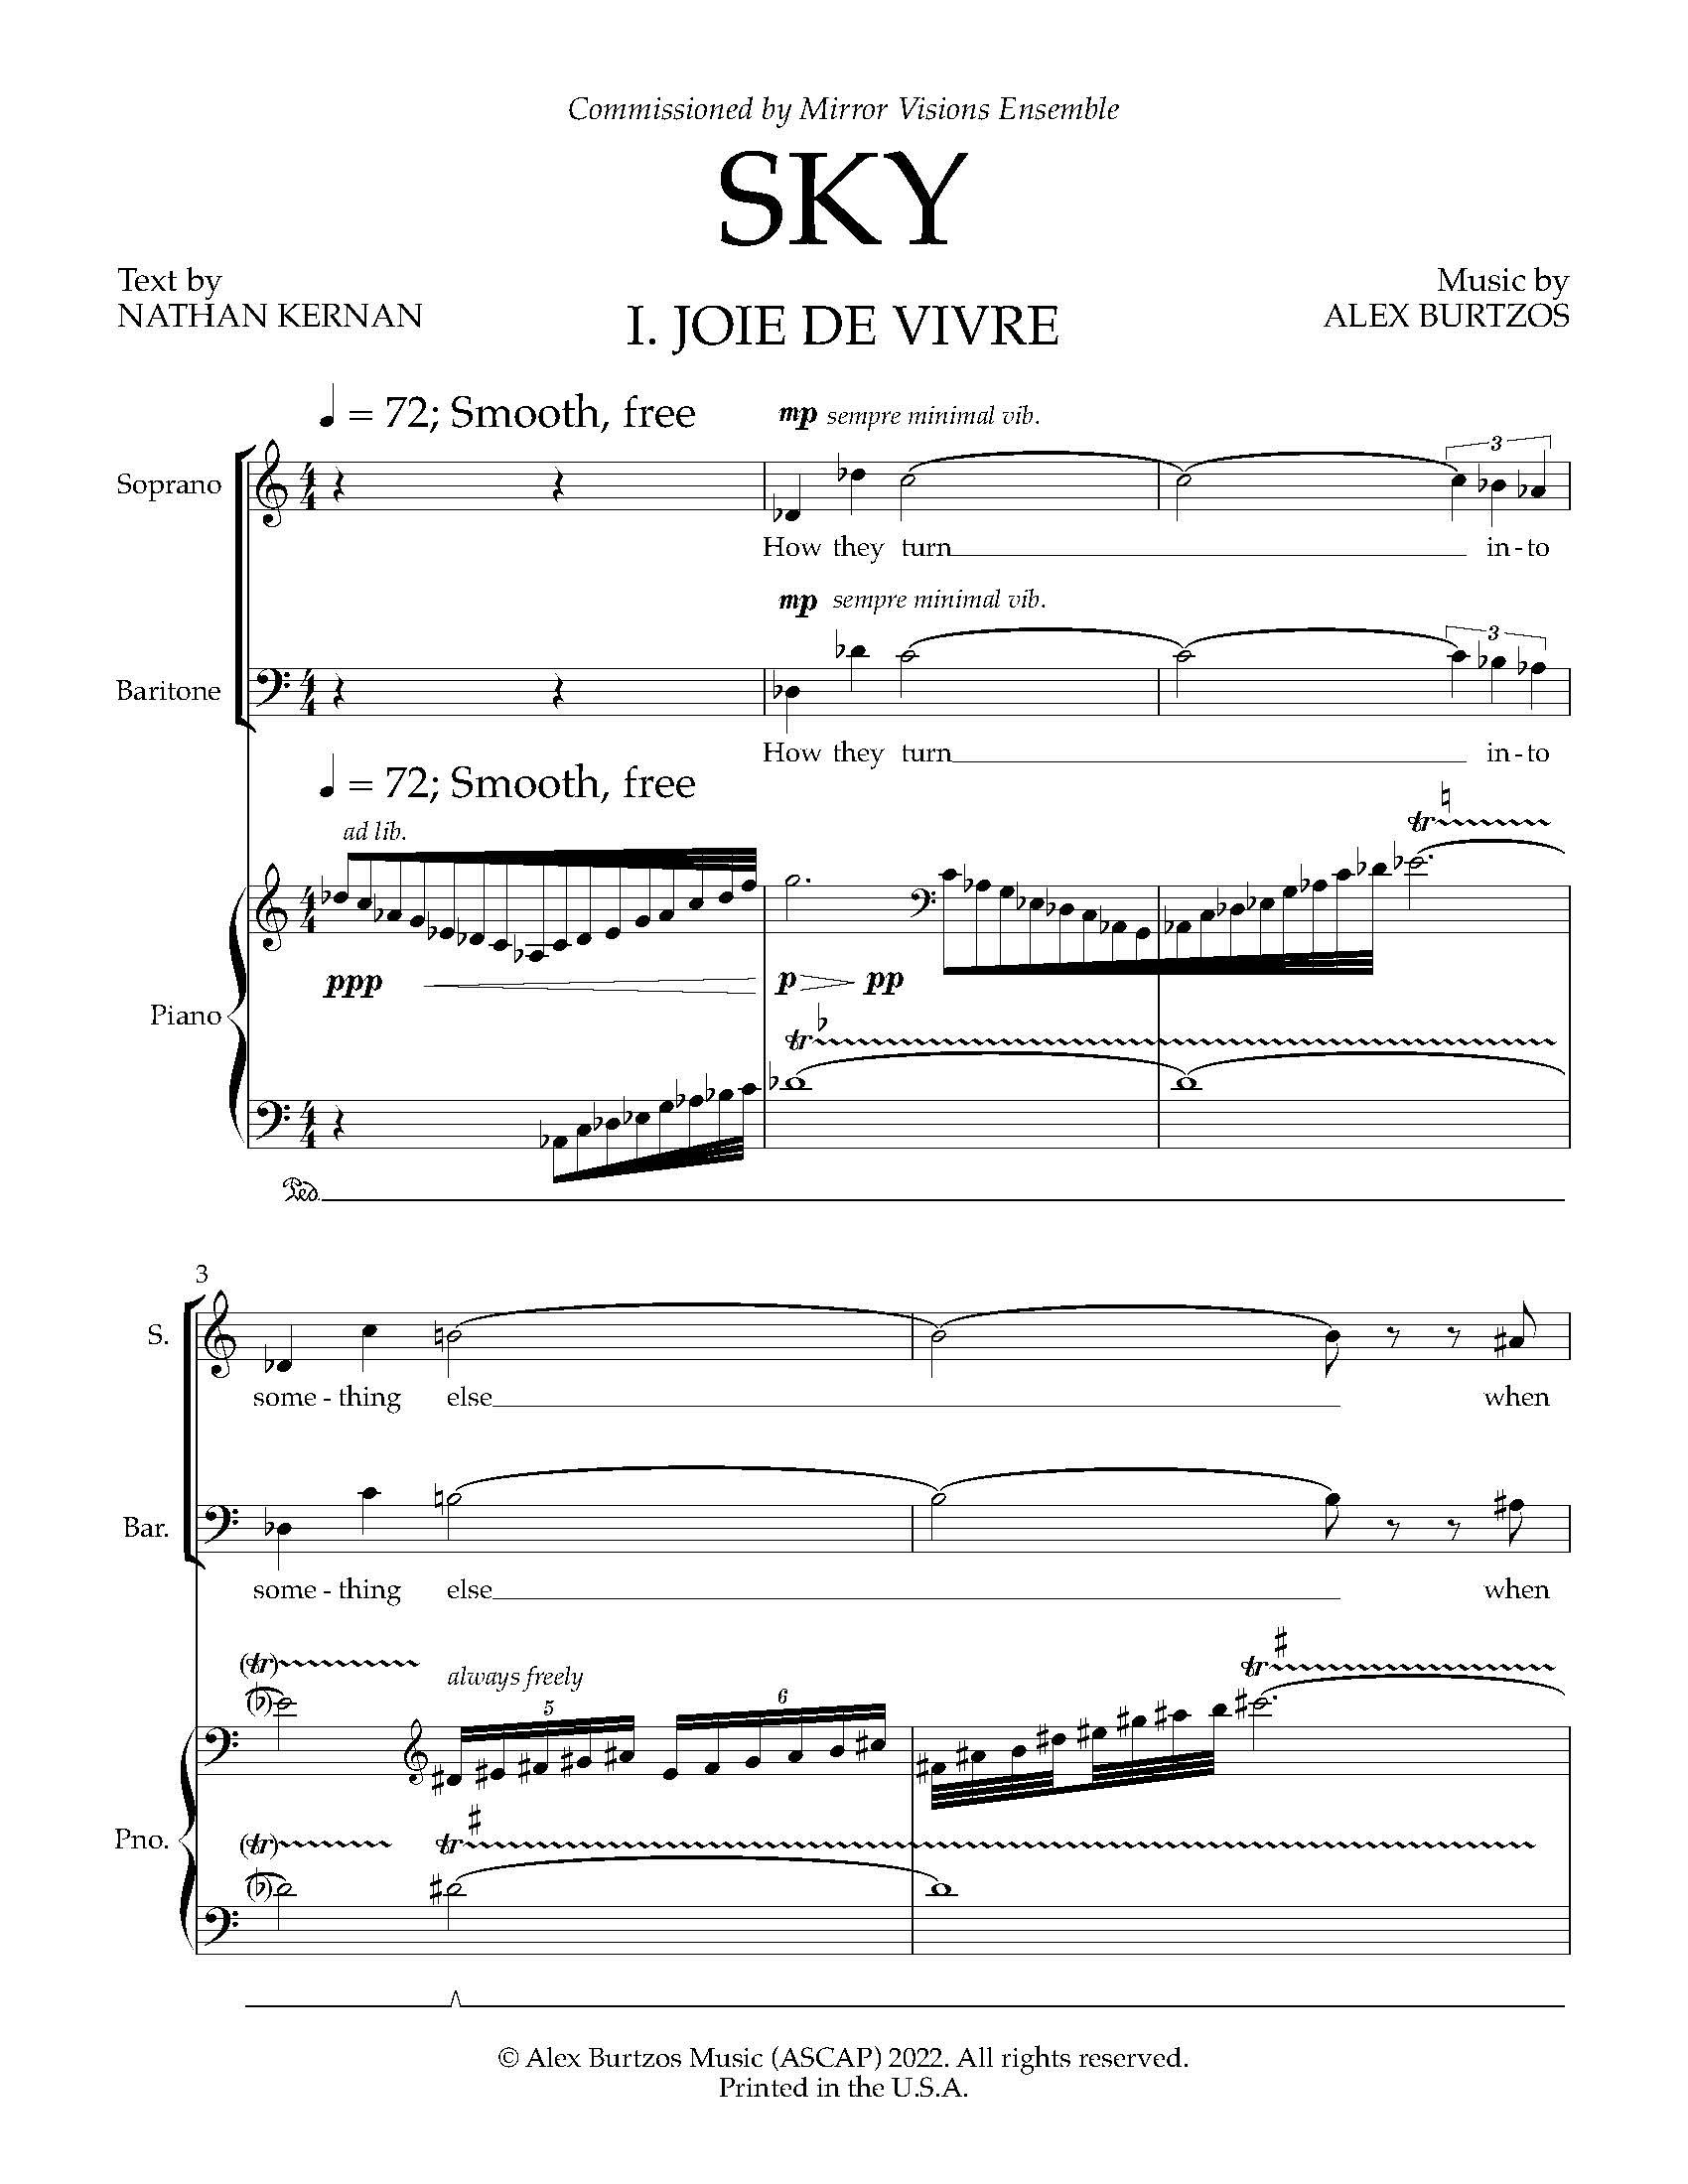 Sky - Complete Score (Revised)_Page_07.jpg